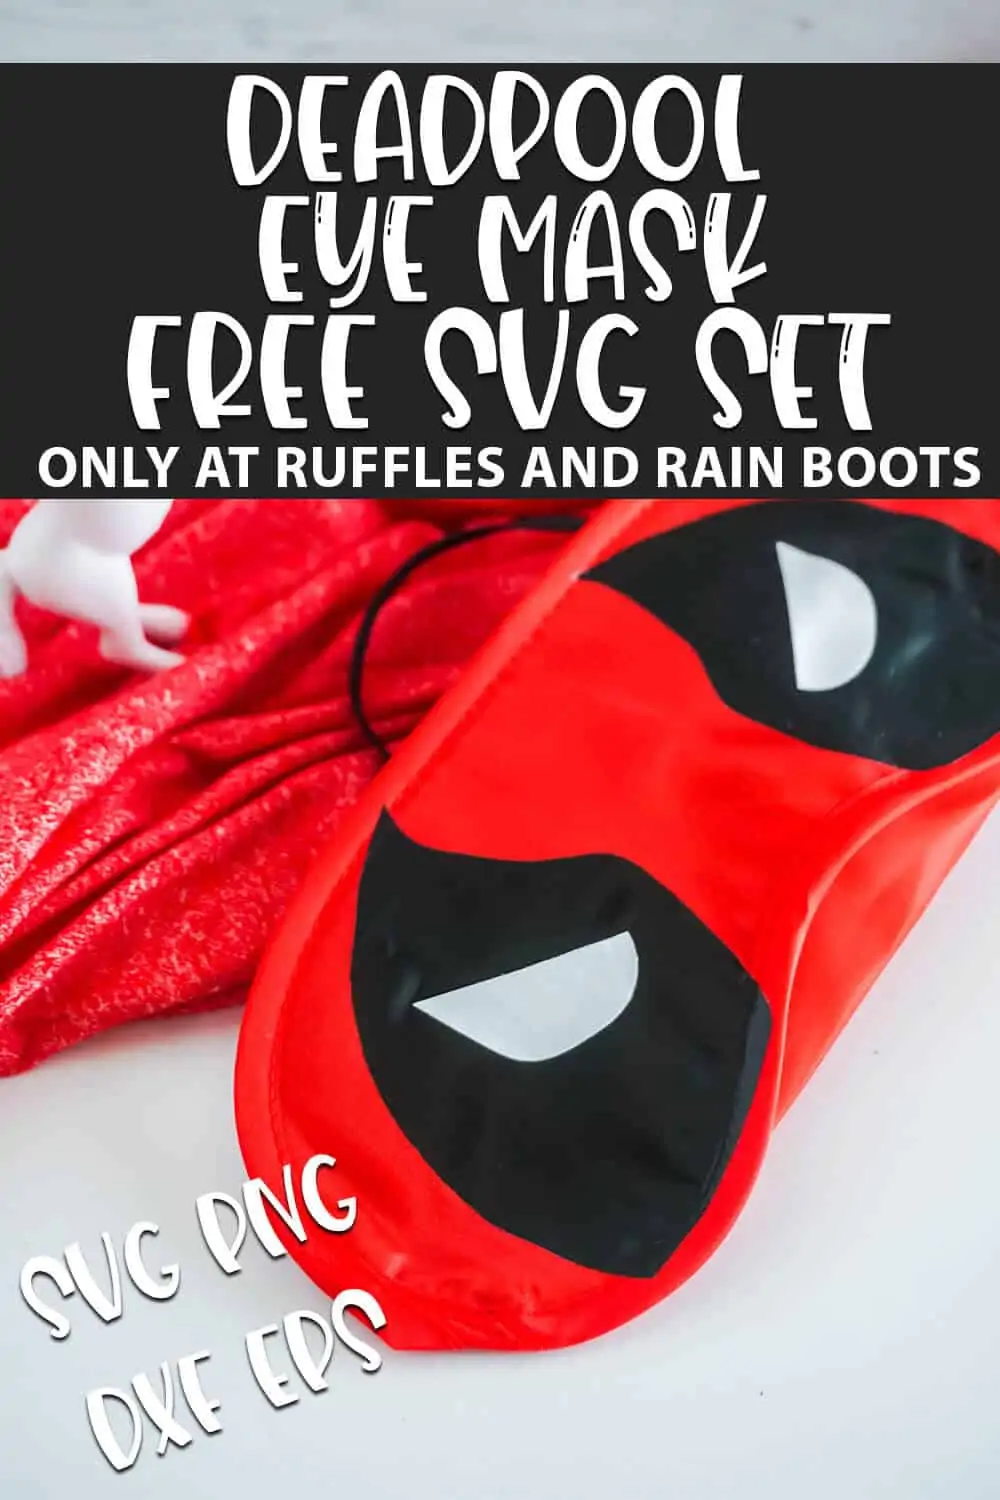 Deadpool Eye Mask cut file set for cricut or silhouette with text which reads deadpool eye mask free svg set svg png dxf eps